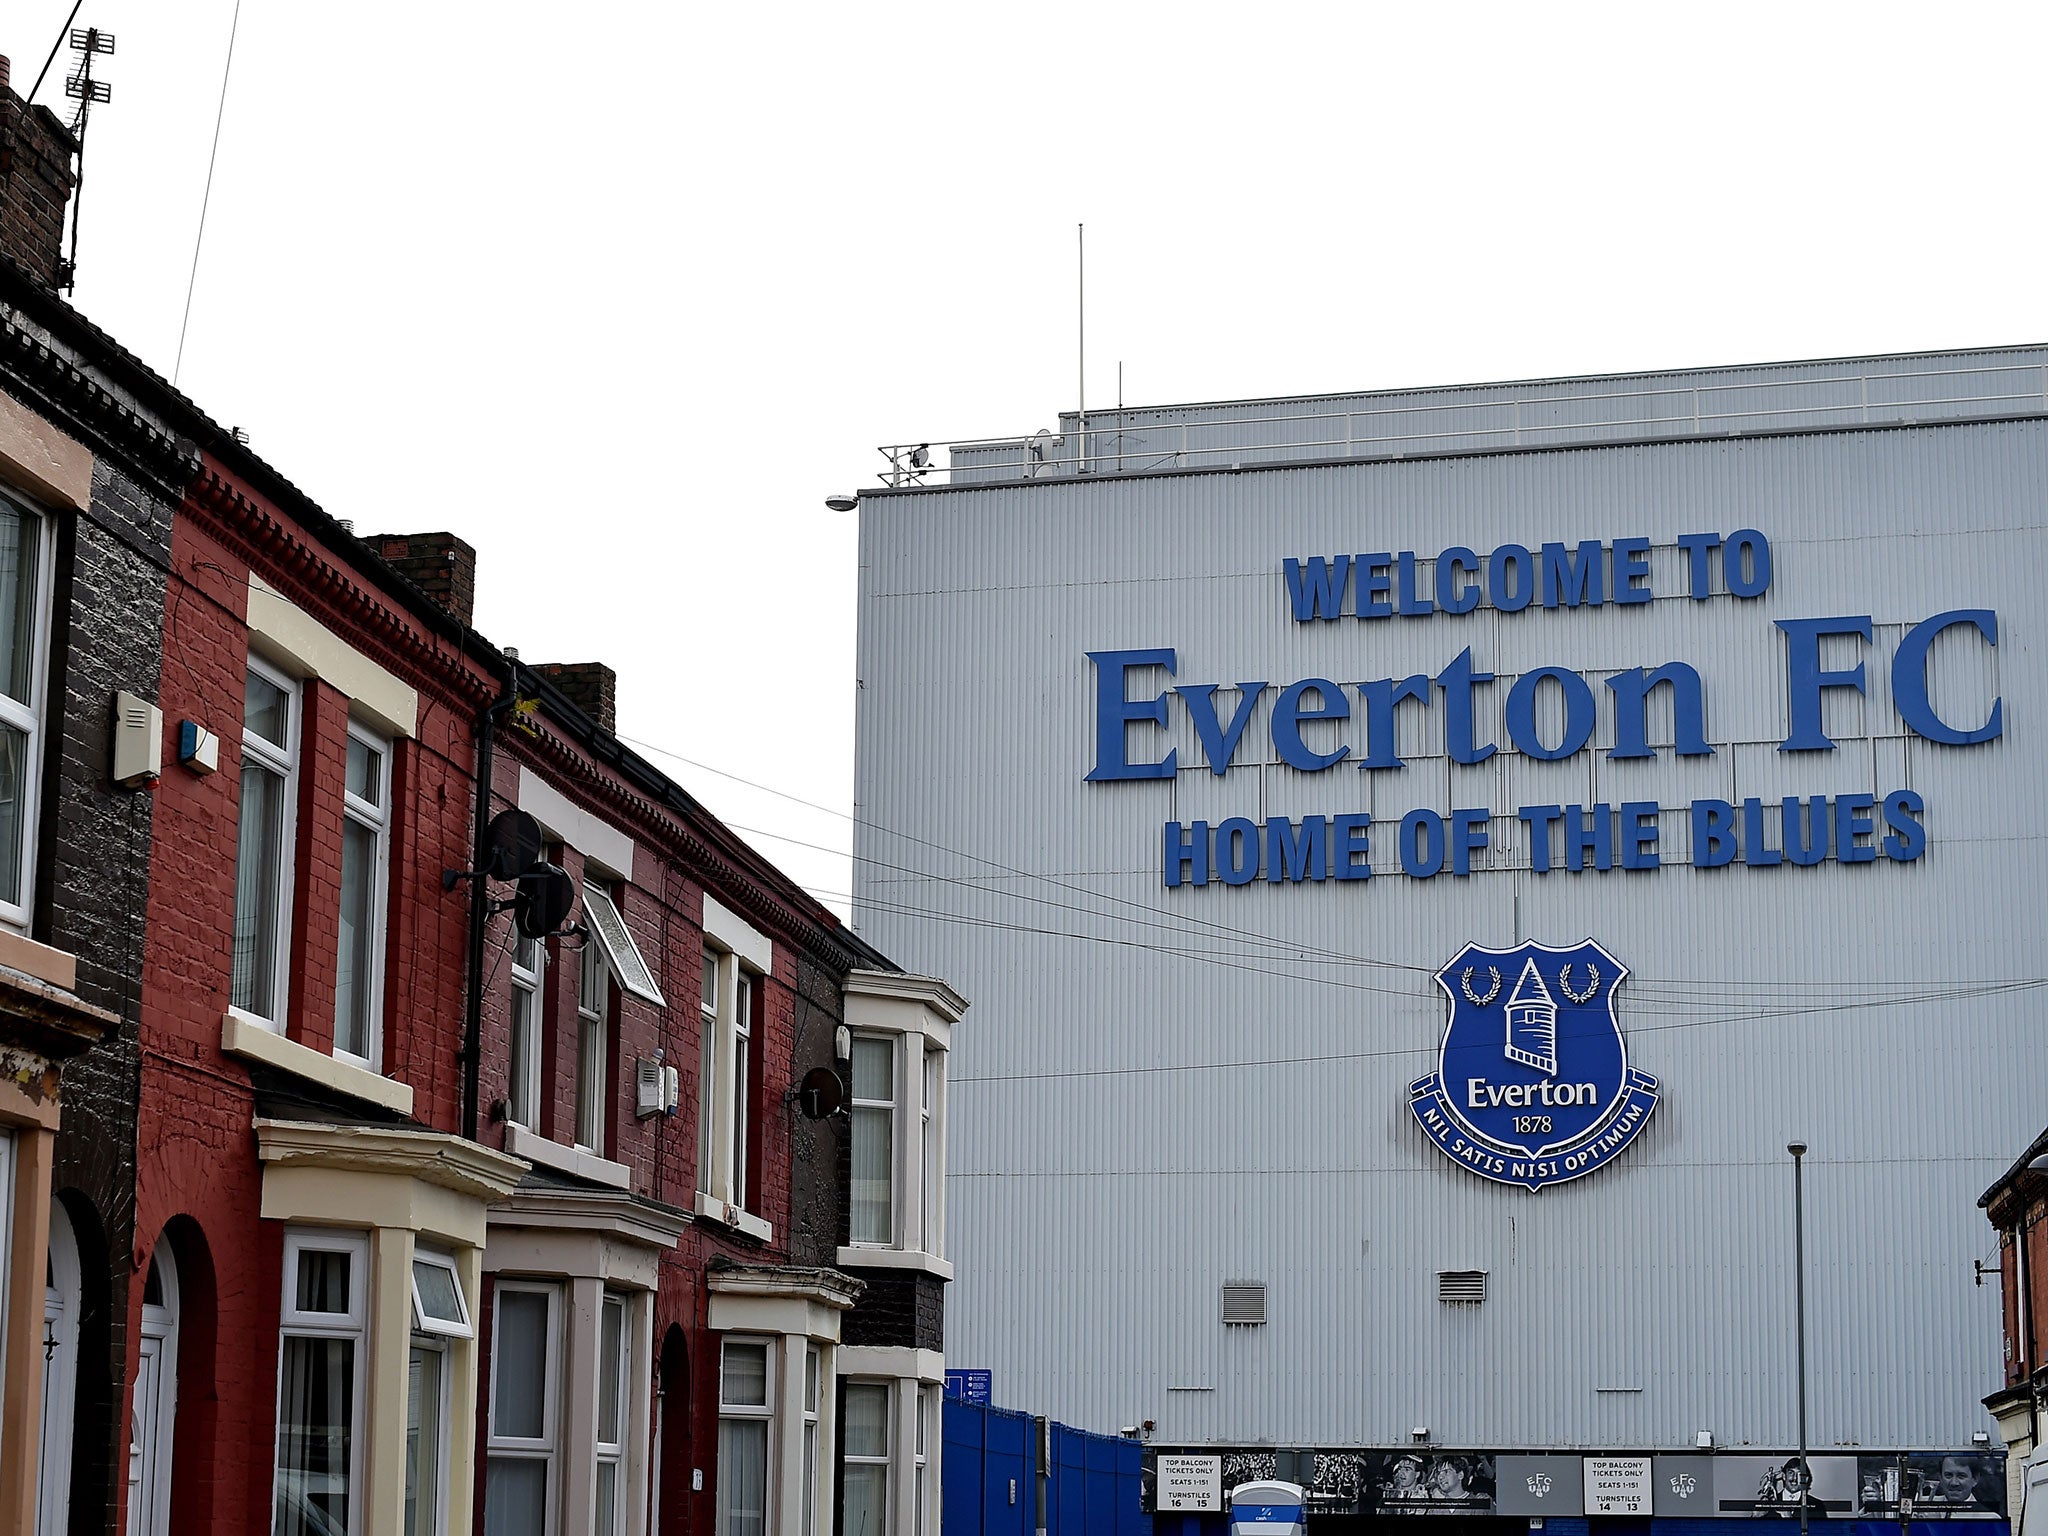 A view of Everton's Goodison Park